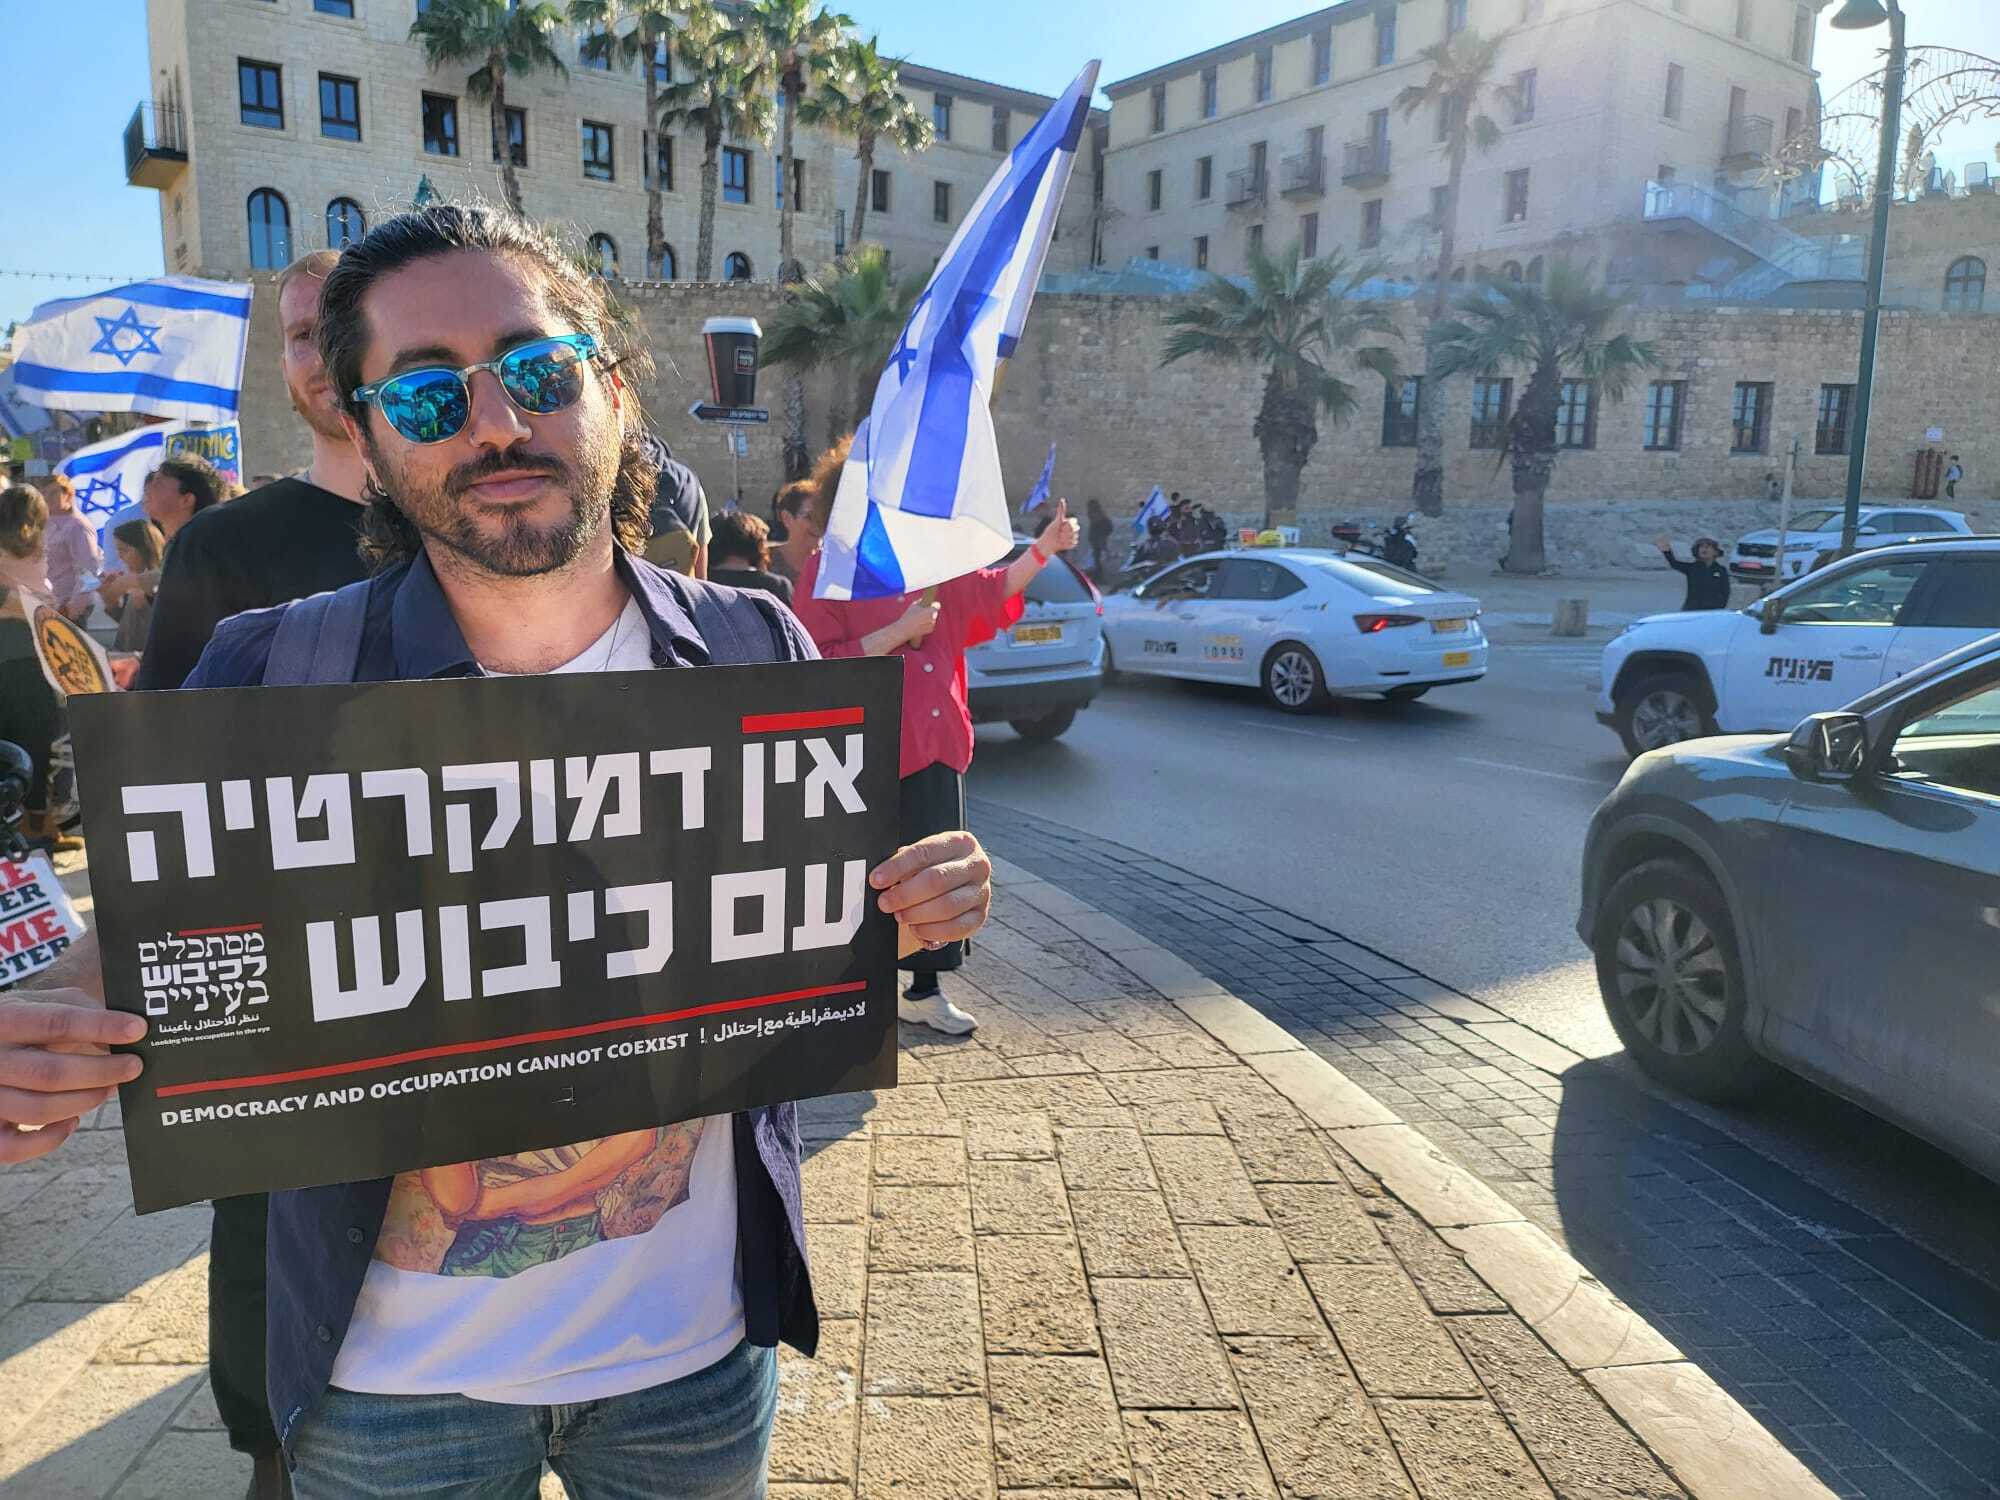 Justin Jacobs, a recent immigrant to Israel from the United States, said he is hopeful about the outcome of the protest movement. (Deborah Danan)